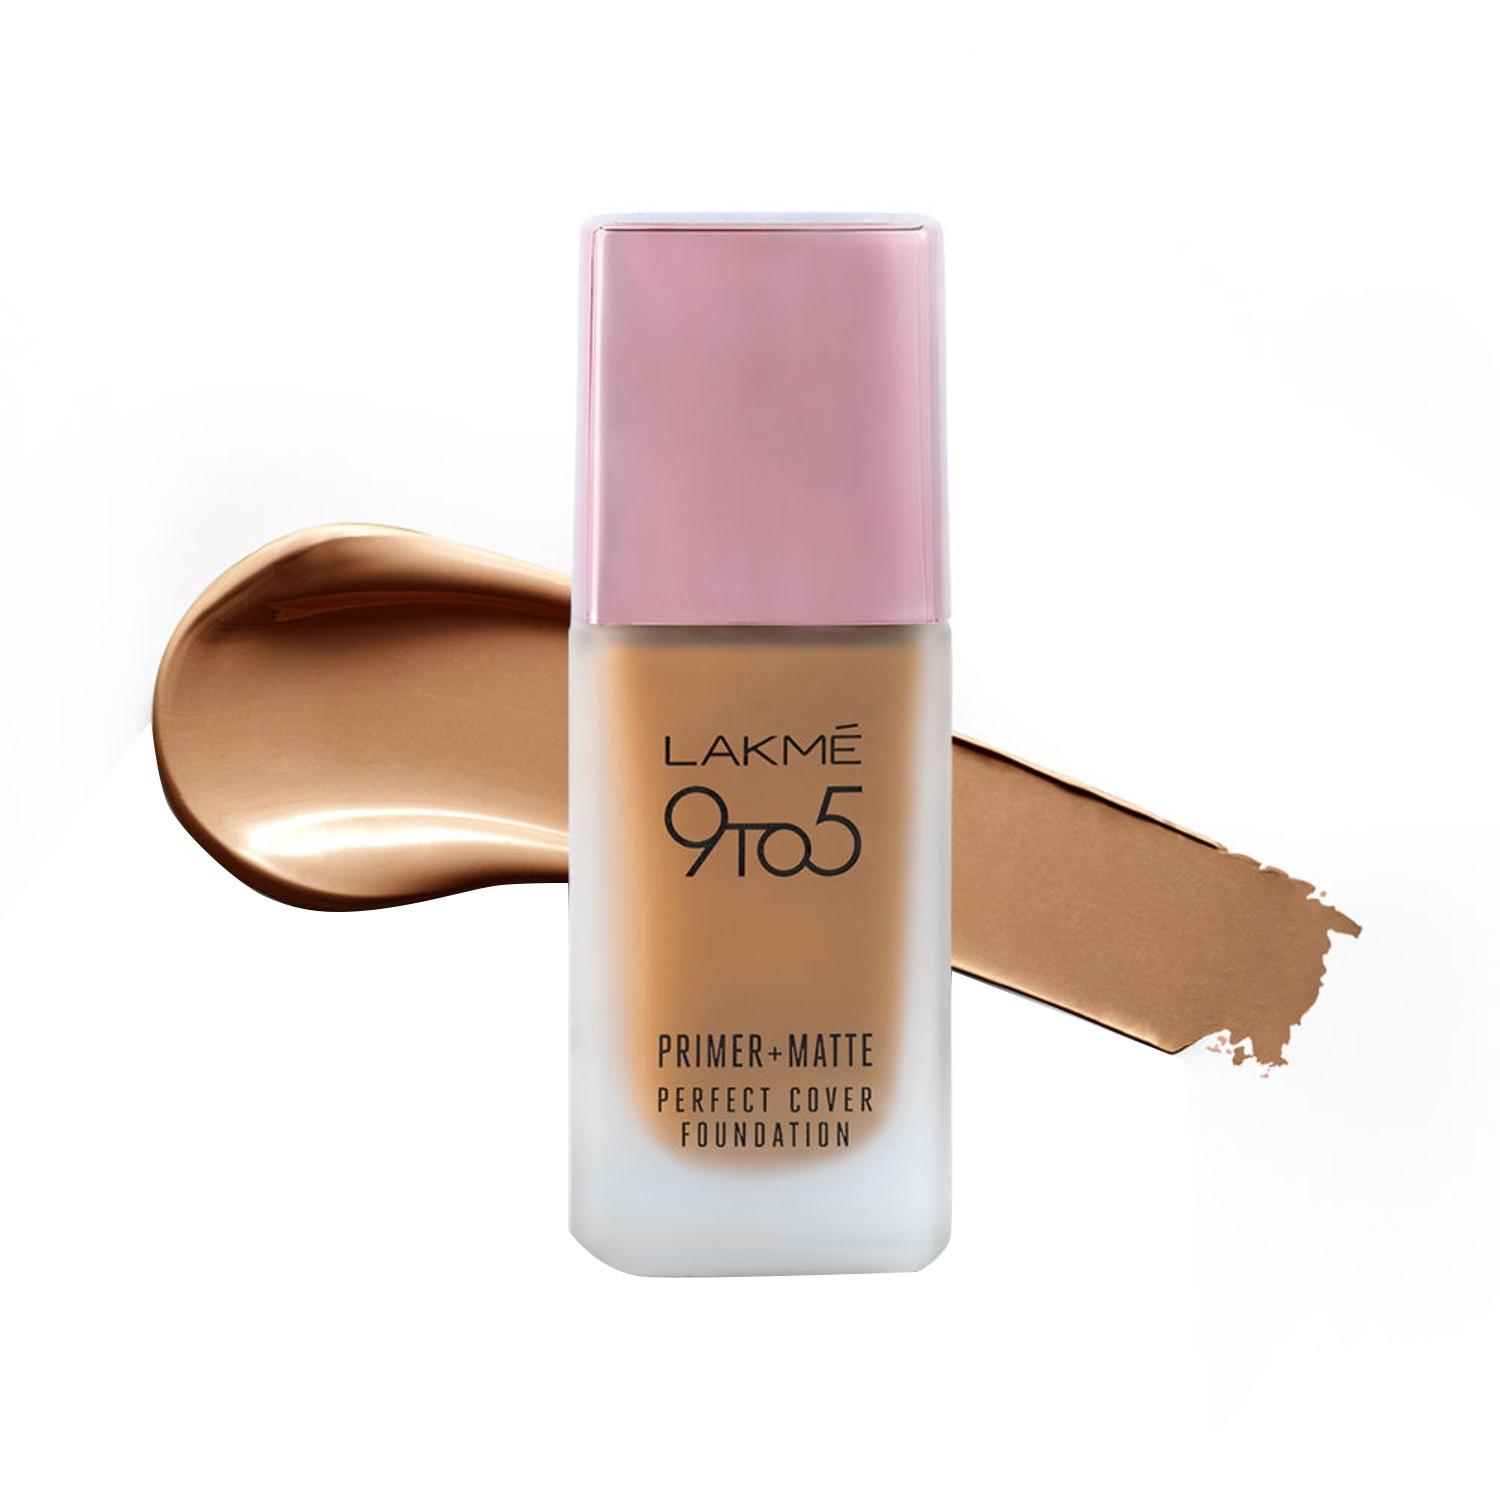 lakme 9 to 5 primer + matte perfect cover foundation - n360 neutral chestnut (25ml)